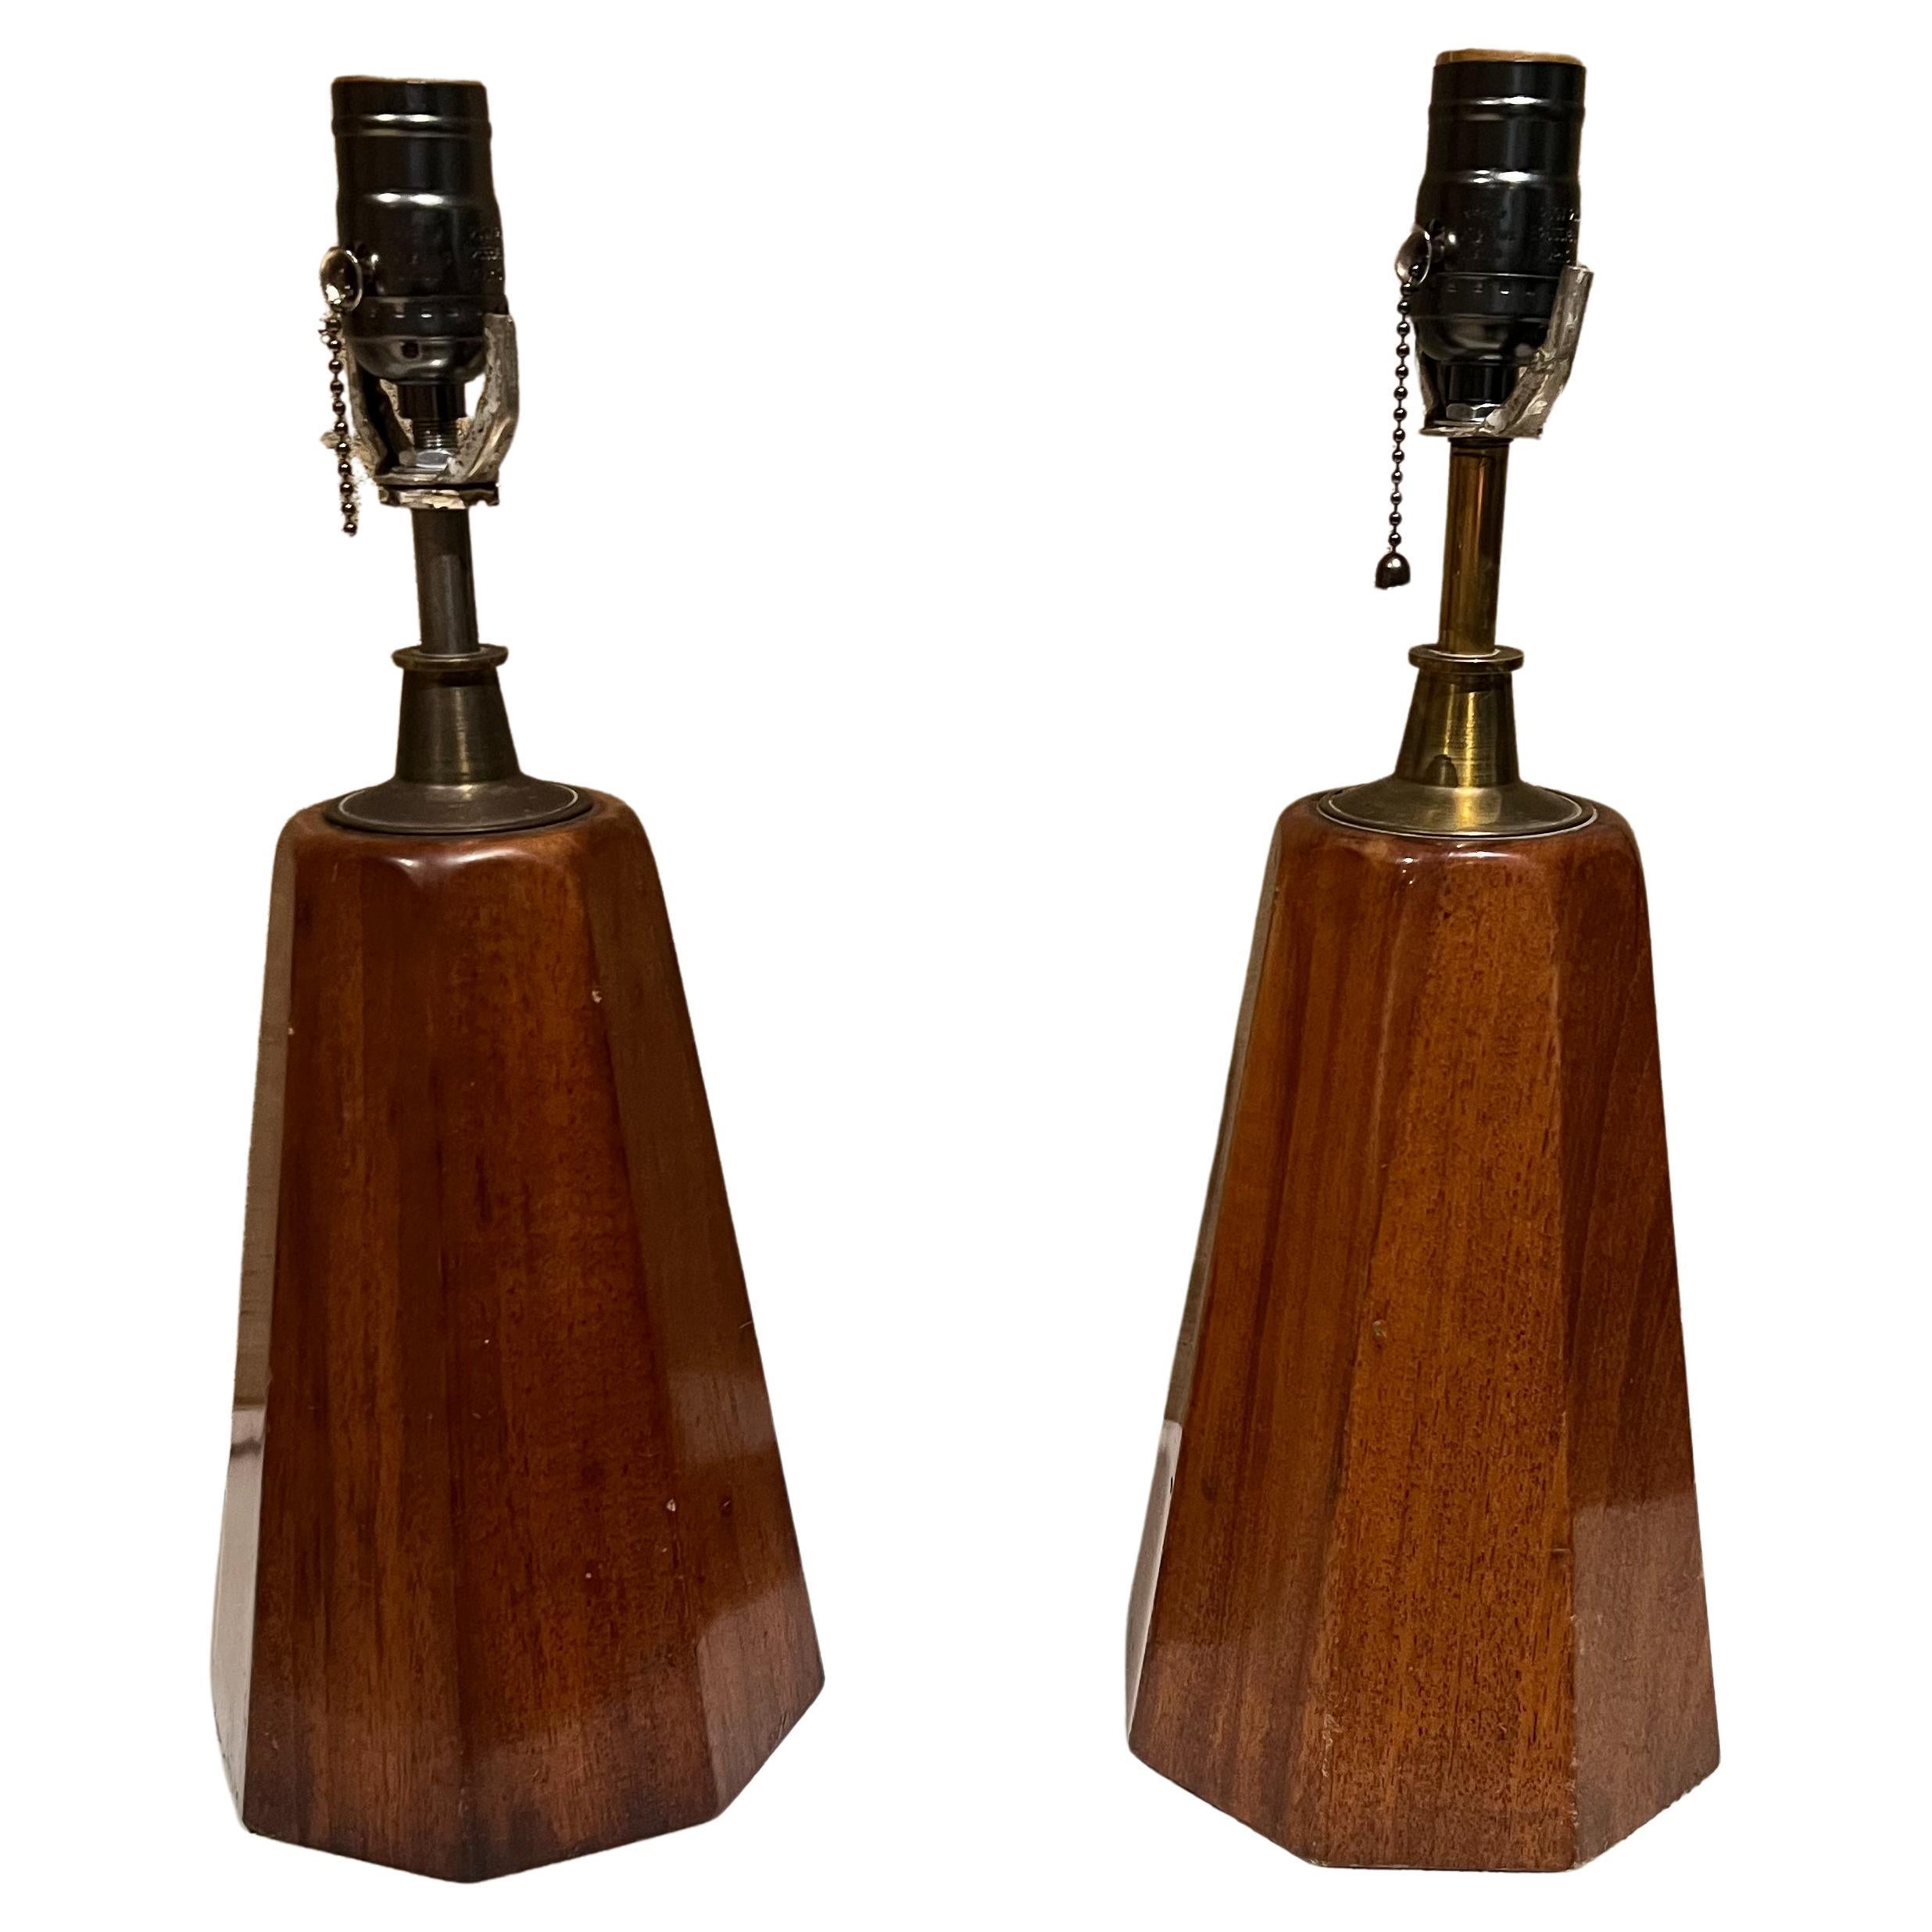 1950s Modern Table Lamps in Mahogany & Brass by Angelita Mexico